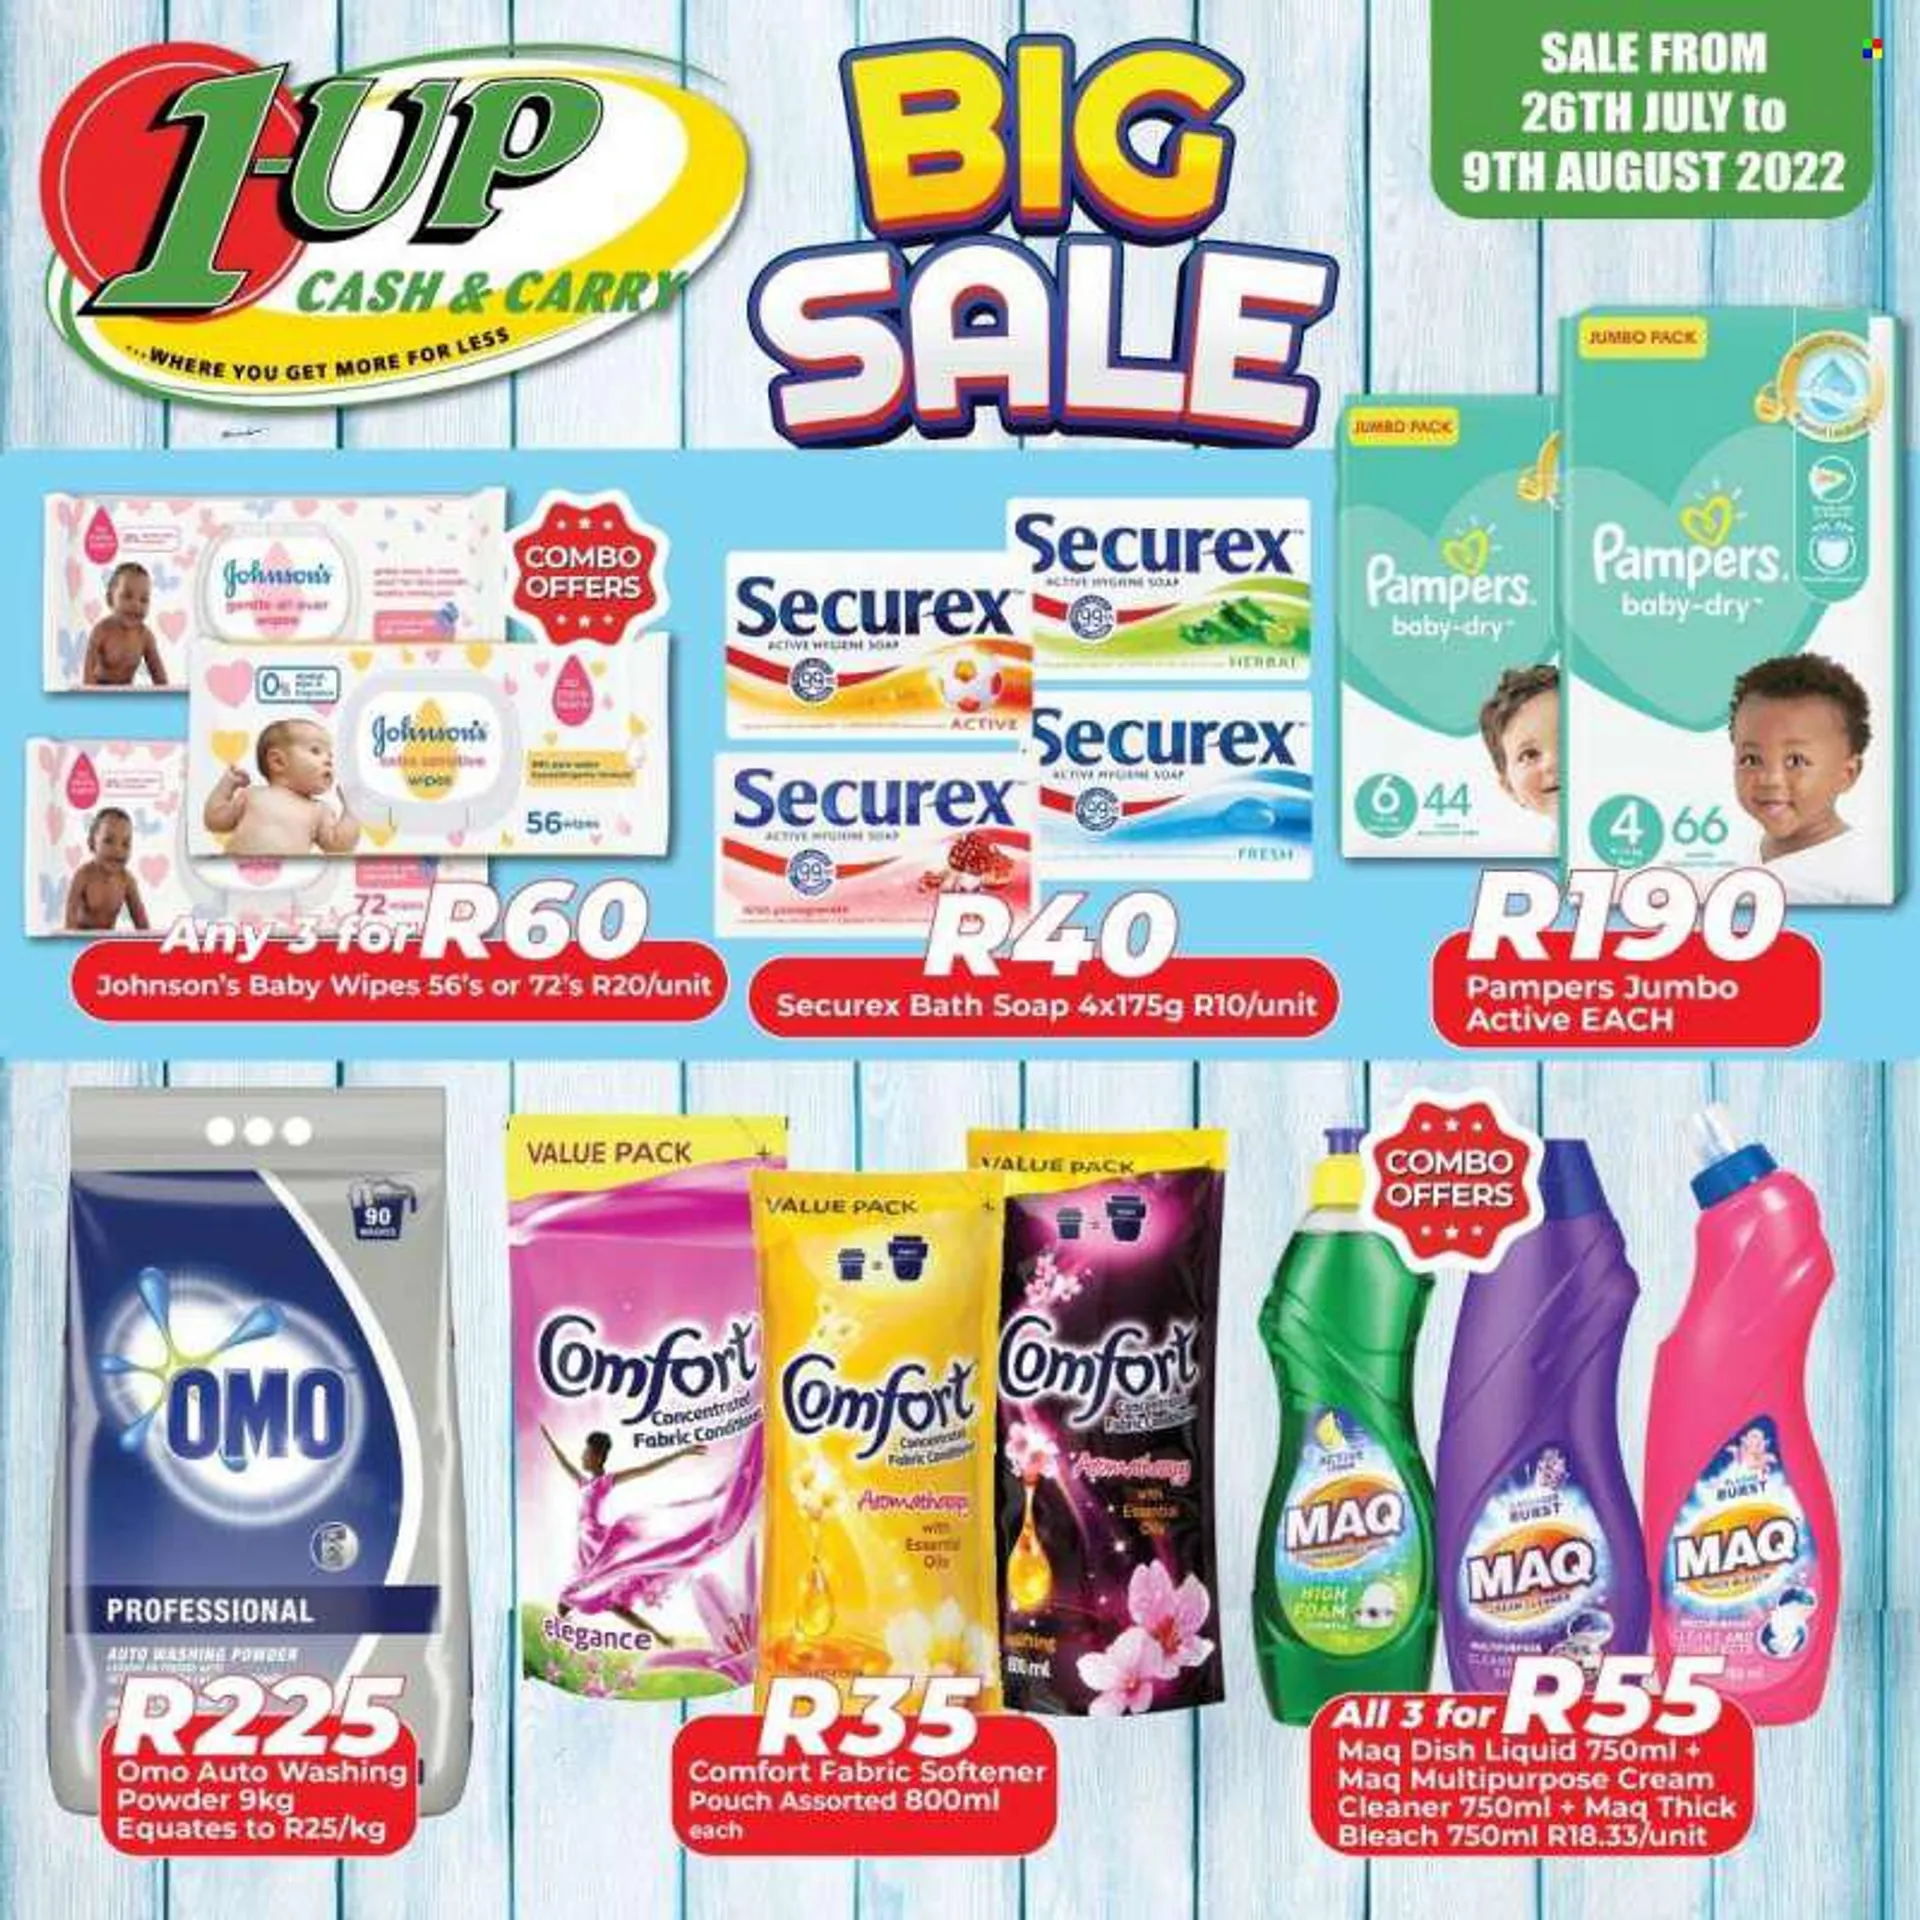 1UP Cash &amp; Carry catalogue  - 26/07/2022 - 09/08/2022 - Sales products - wipes, Pampers, baby wipes, Johnsons, cream cleaner, bleach, cleaner, fabric softener, Omo, thick bleach, laundry powder, Comfort softener, dishwashing liquid, soap, pomegranate.